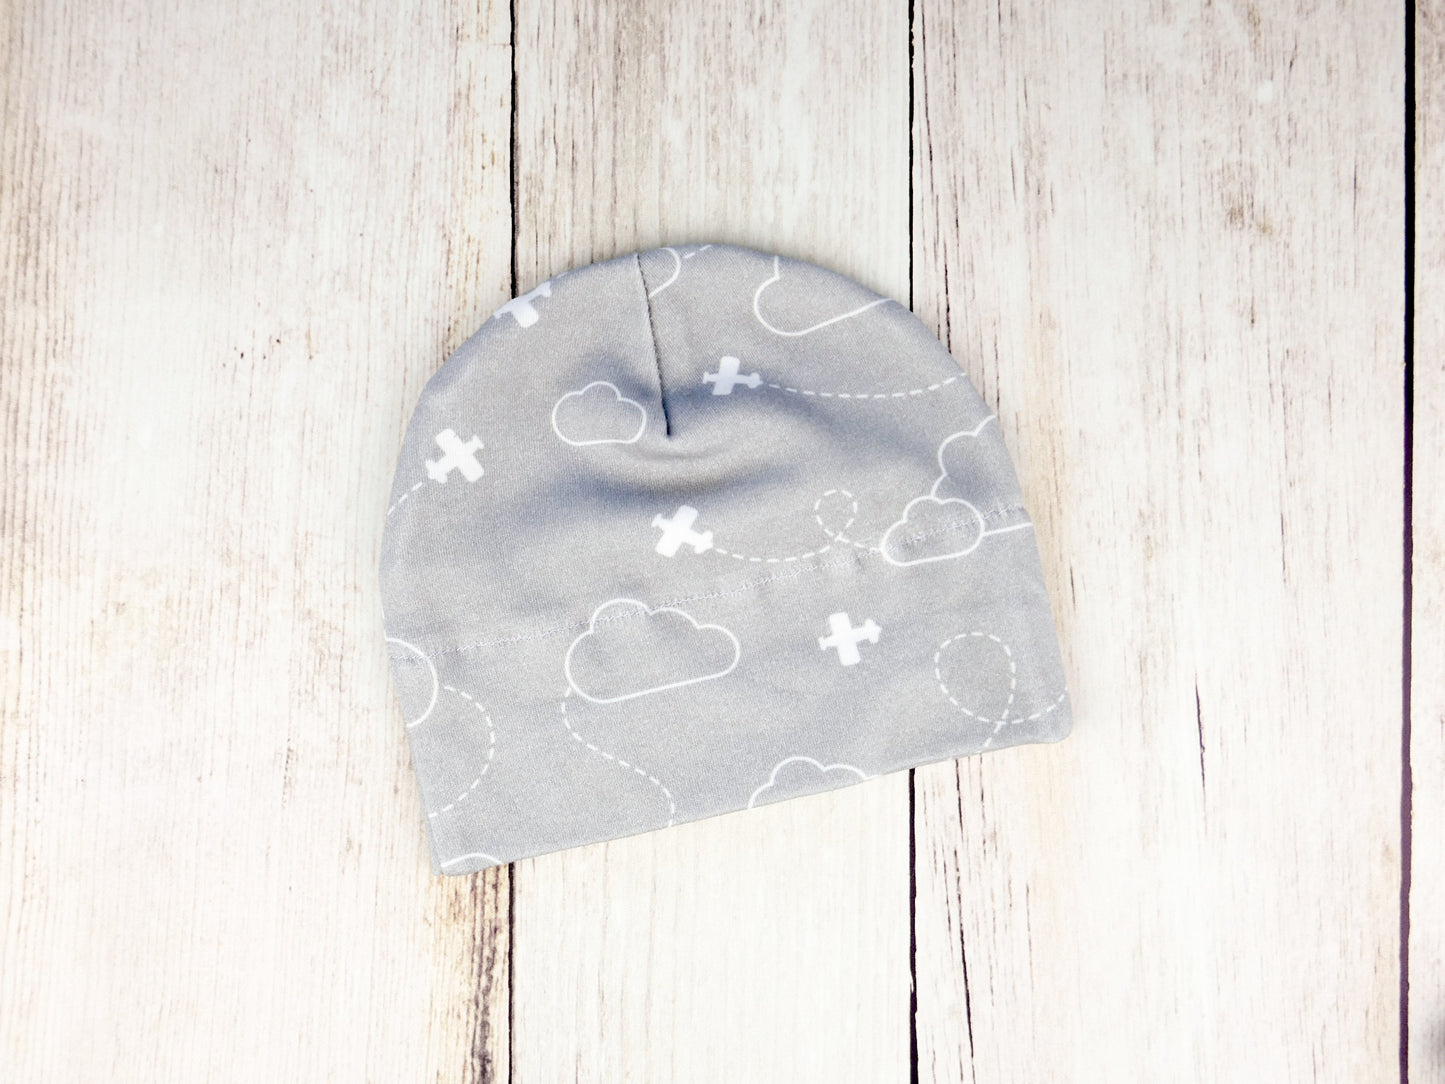 Airplanes in Clouds Organic Beanie - White / Gray - CAVU Creations